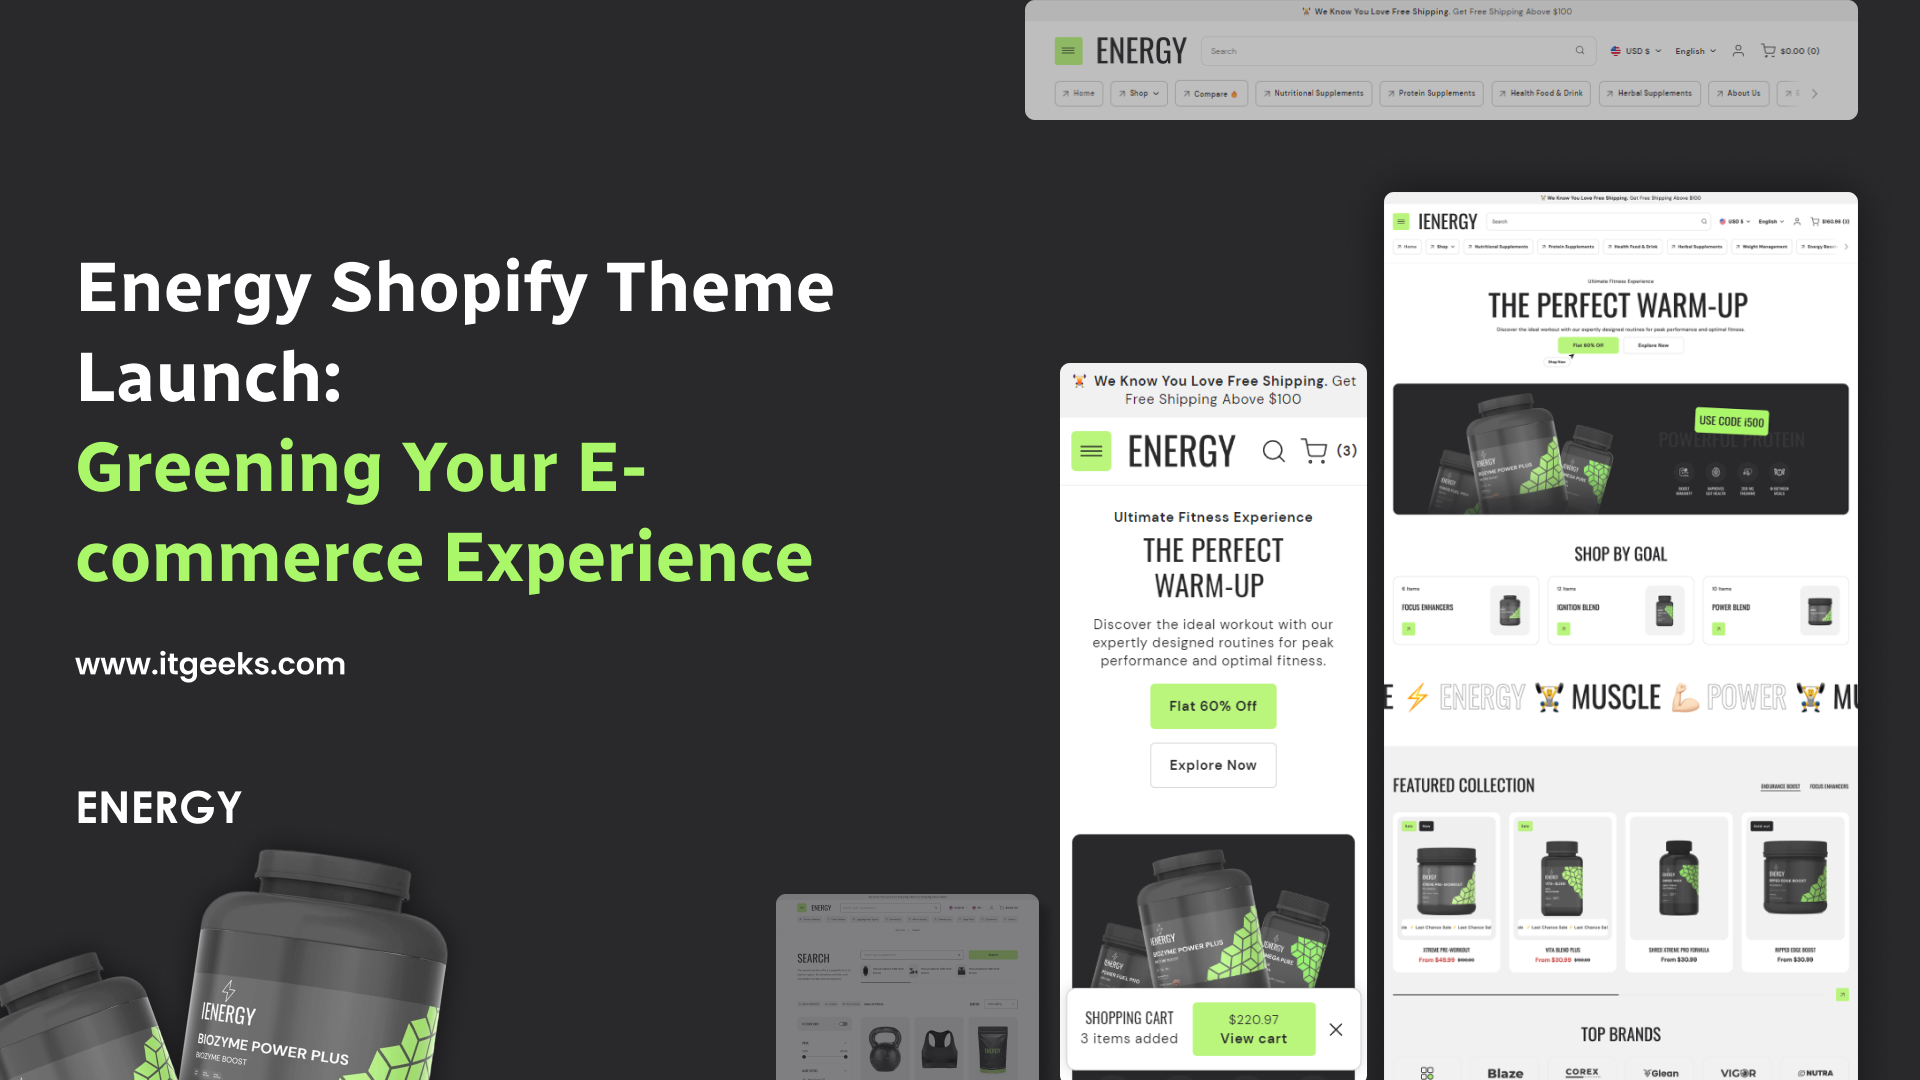 Energy Shopify Theme Launch: Greening Your E-commerce Experience